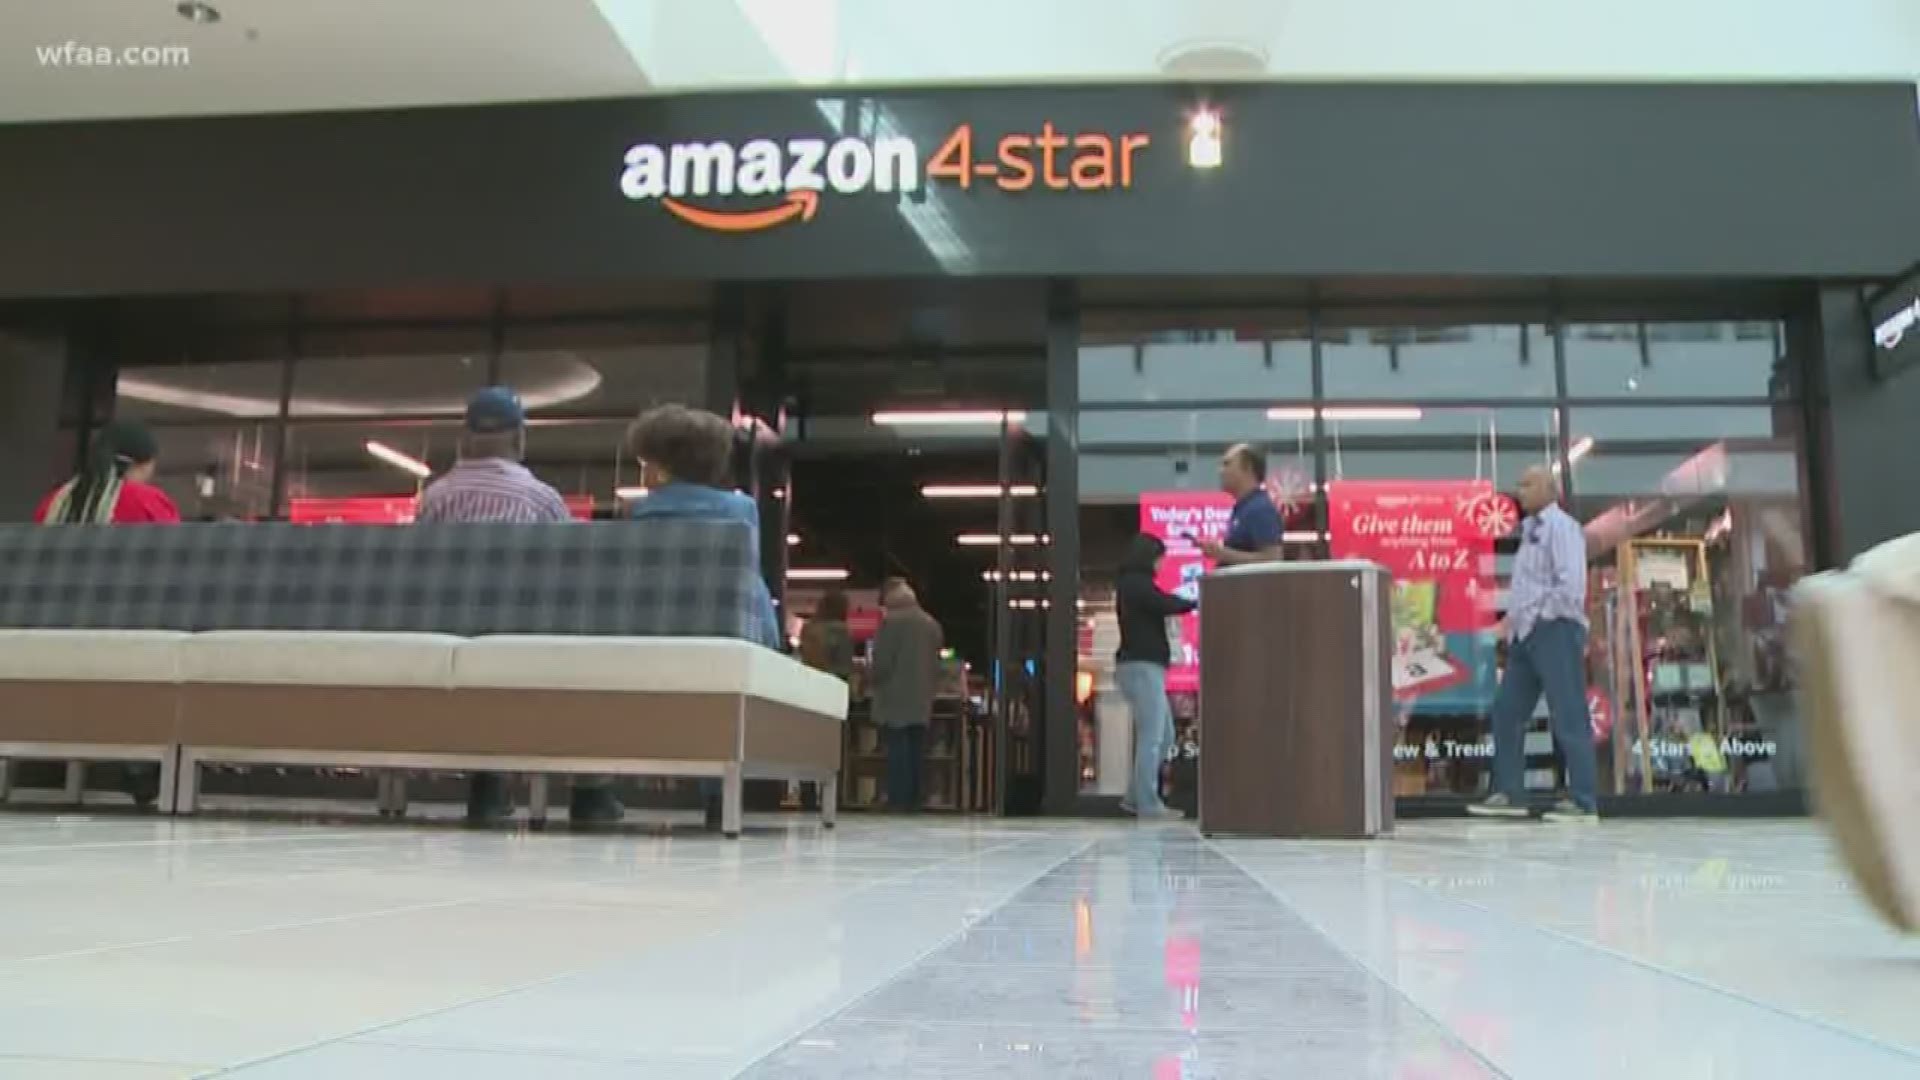 Amazon chose Frisco to open a brick-and-mortar store. It's called Amazon 4-Star and had its grand opening on Wednesday at Stone Briar Mall.